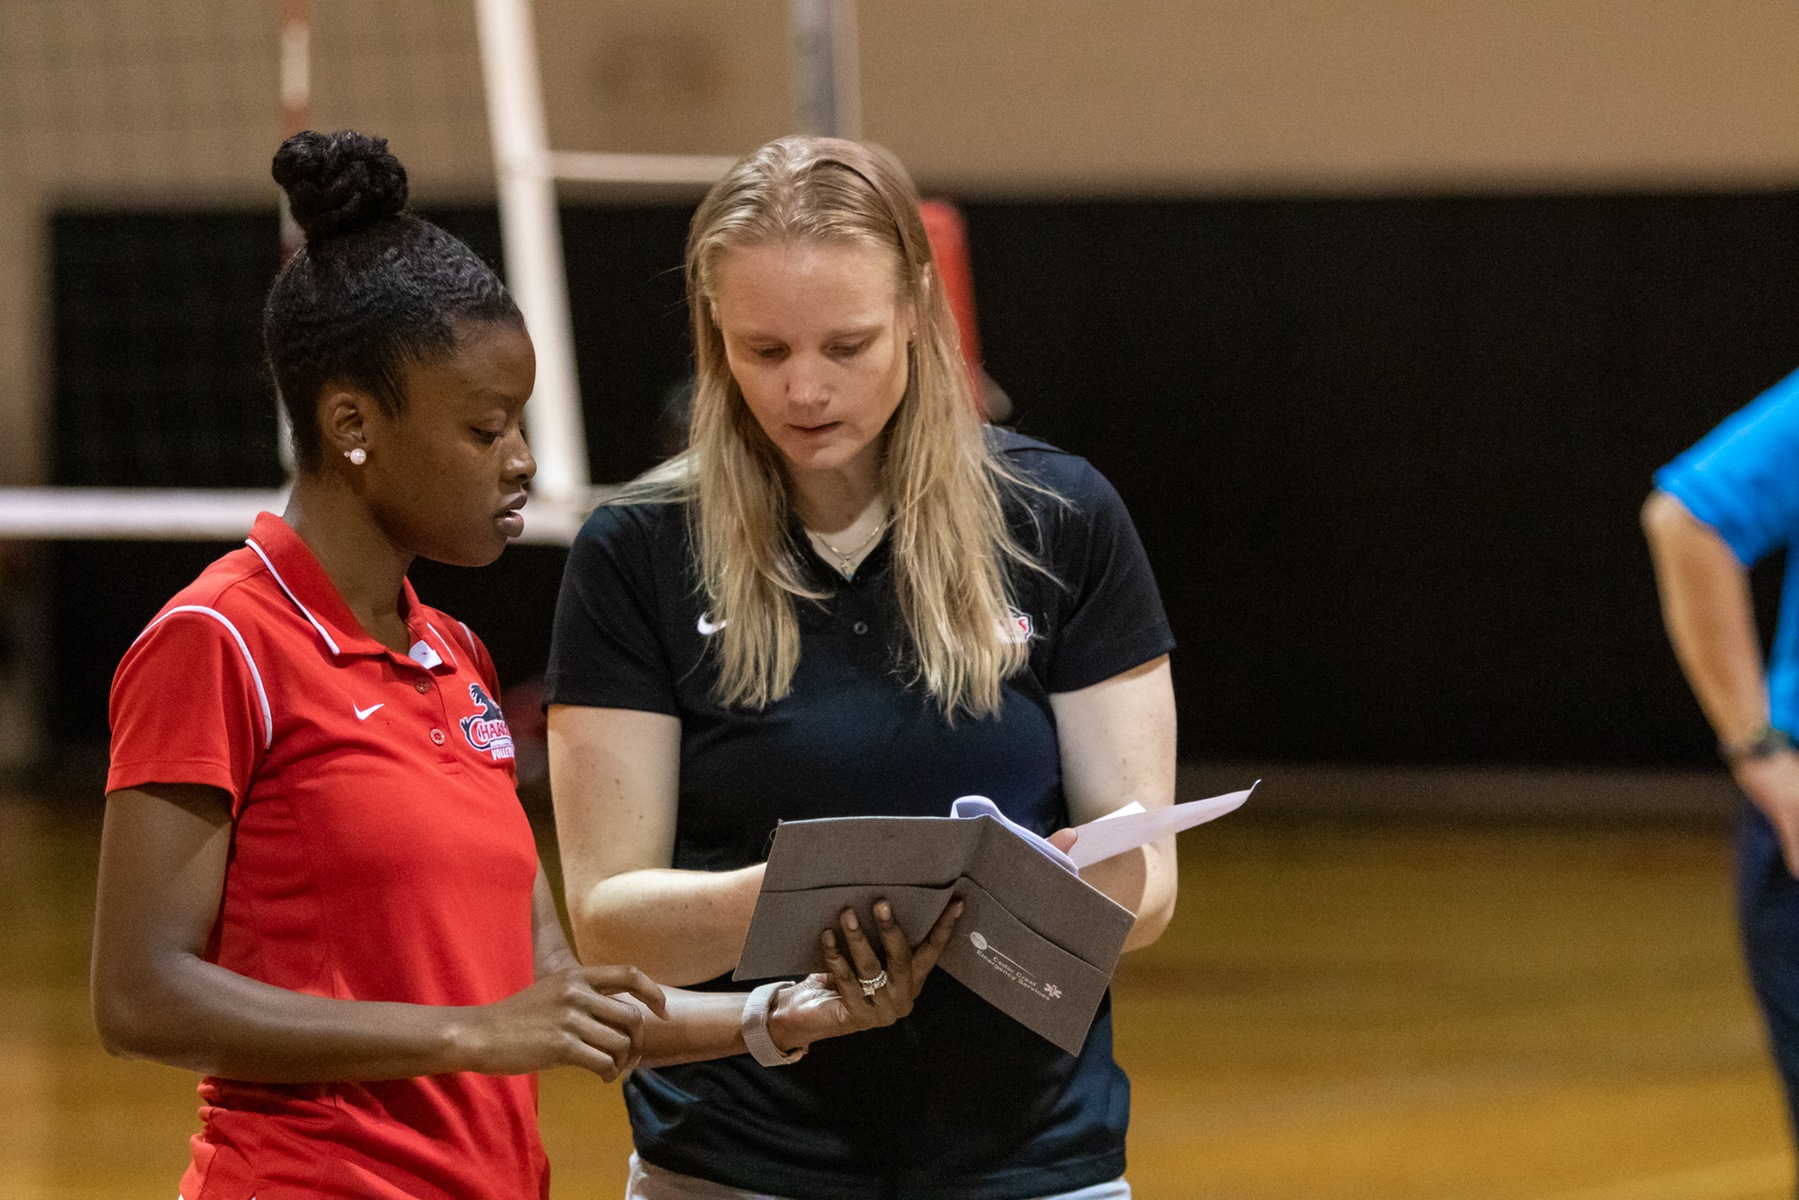 HEDBECK RESIGNS AS DOMINICAN'S HEAD VOLLEYBALL COACH